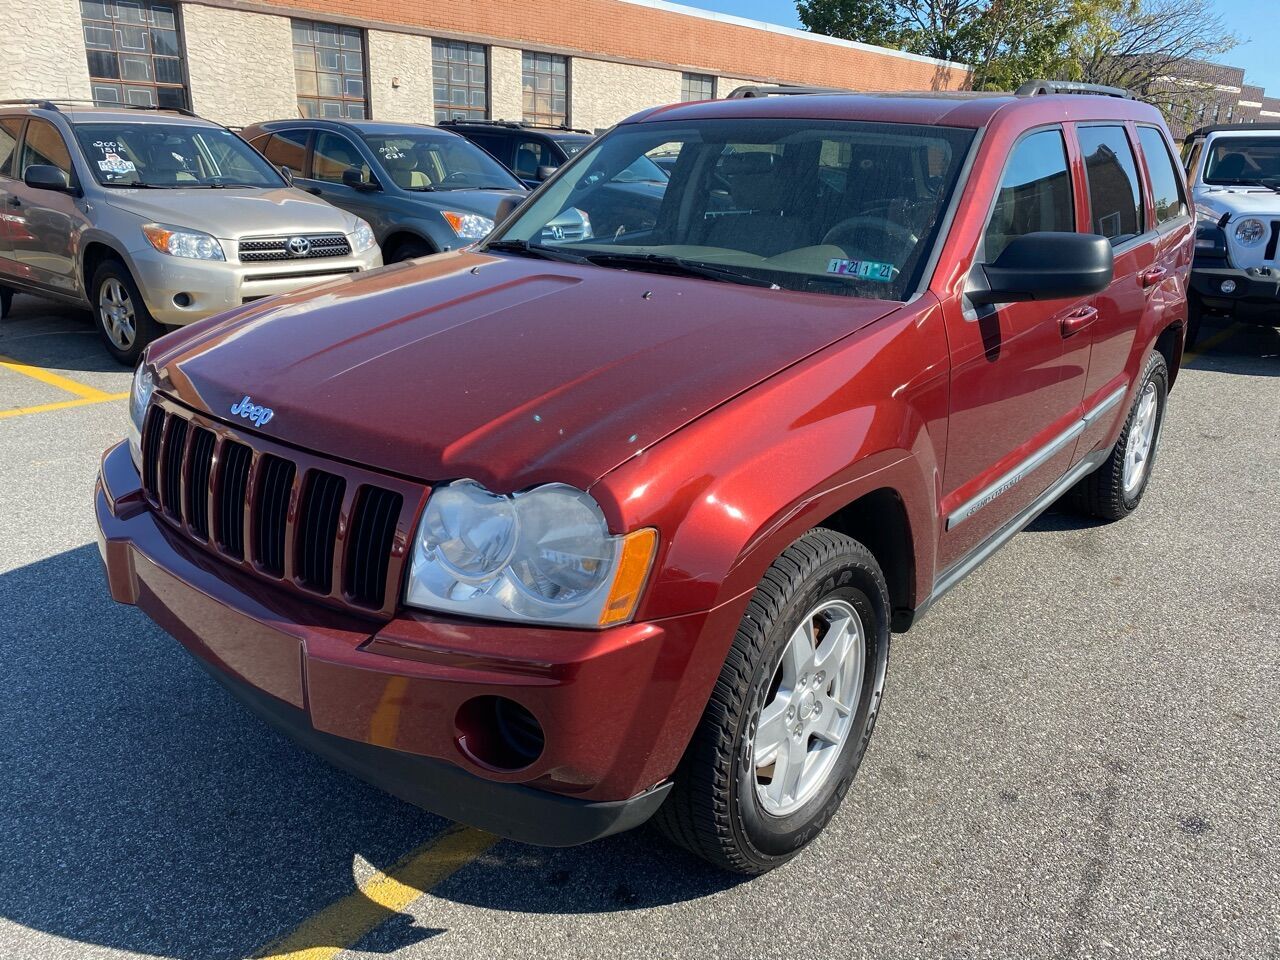 2007 Jeep Grand Cherokee for Sale in Miller Place, NY